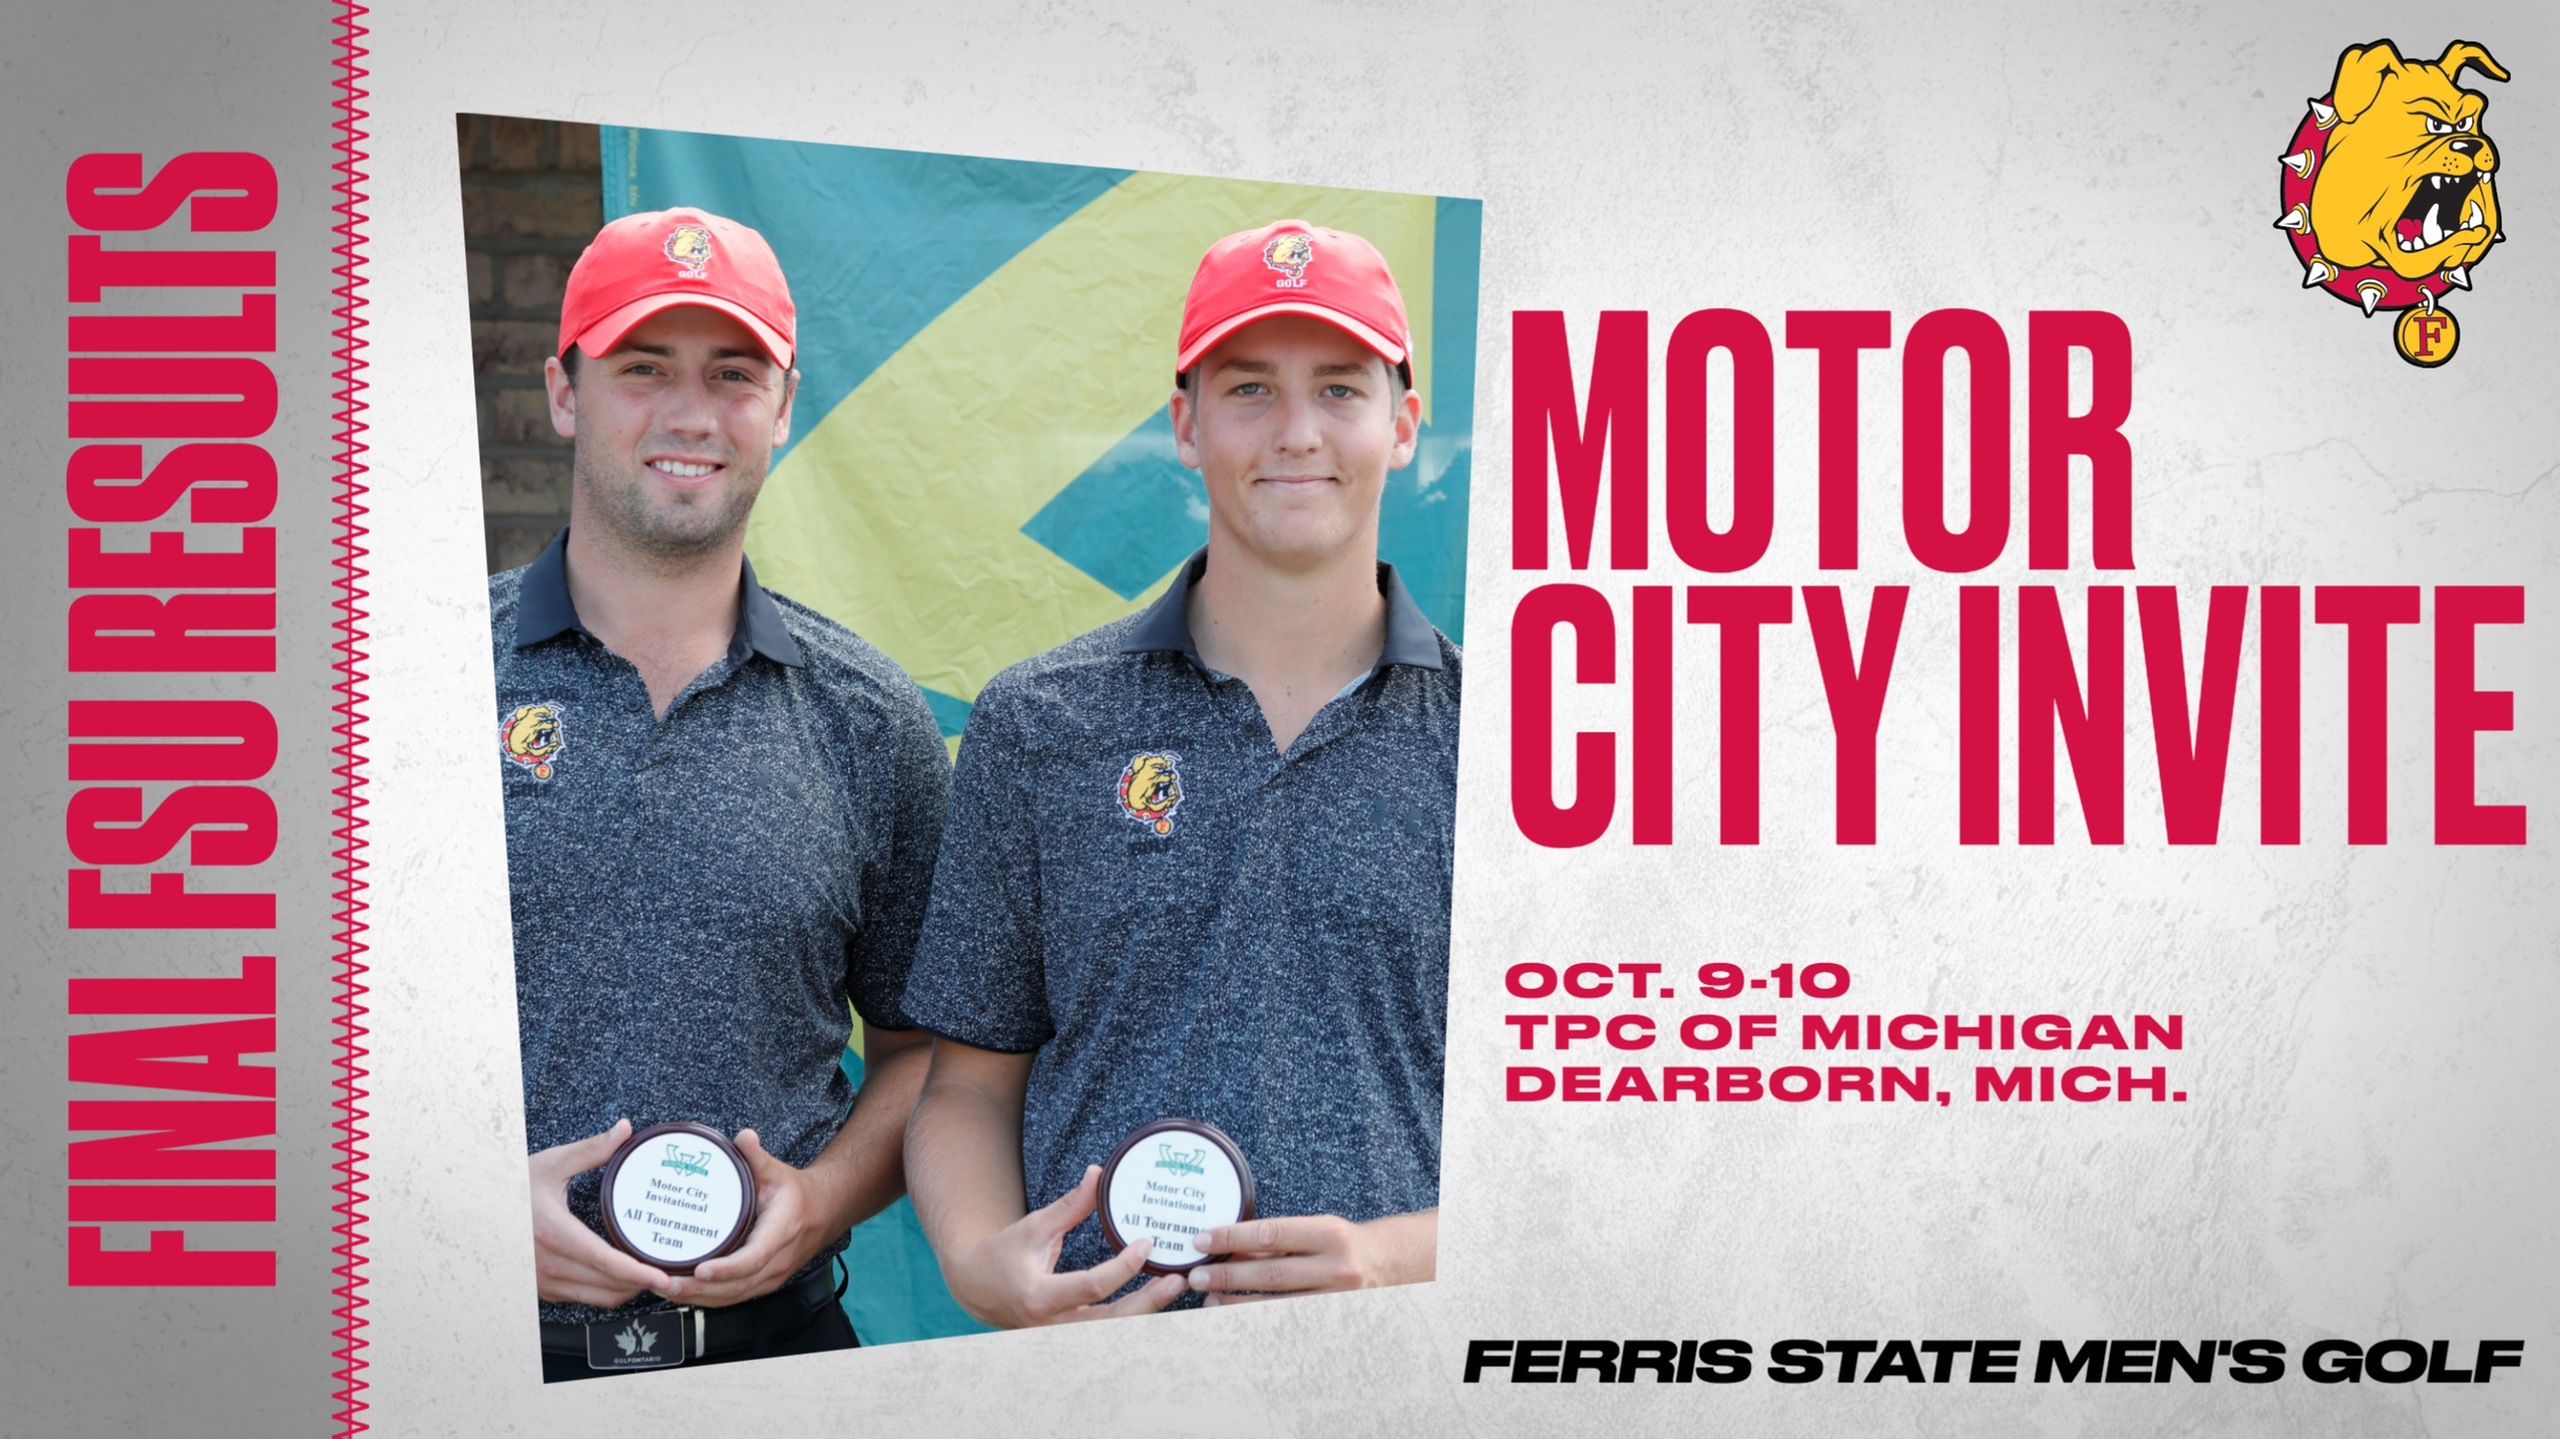 Ferris State Cards Tourney-Low 288 Score To Finish In Third Place At Motor City Invite